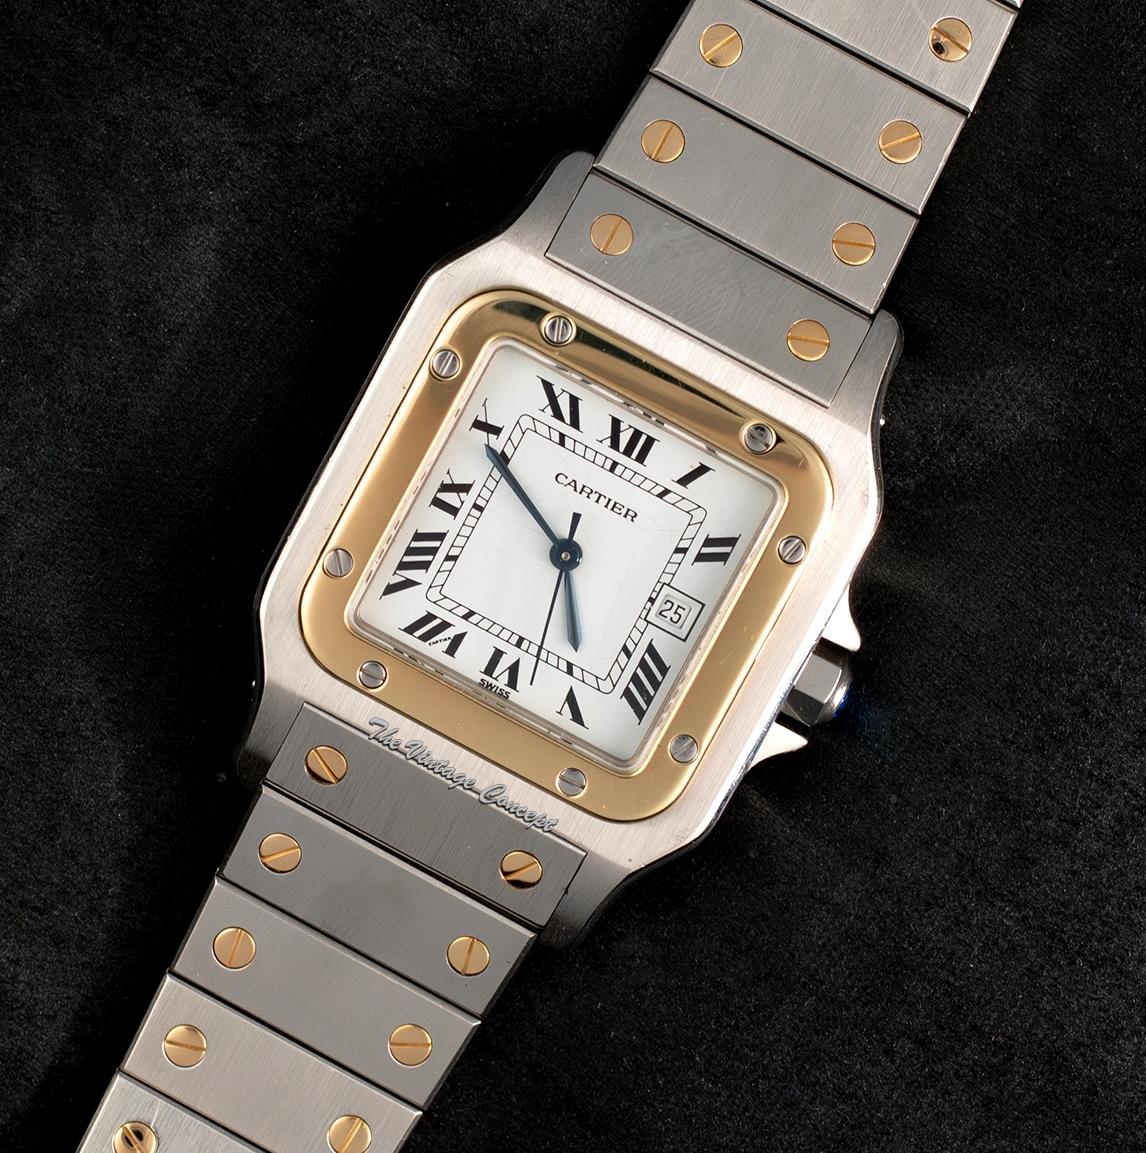 Cartier Large Two-Tone 18K Yellow Gold & Stainless Steel Santos Galbée 2961 Automatic Watch w/ Original Card